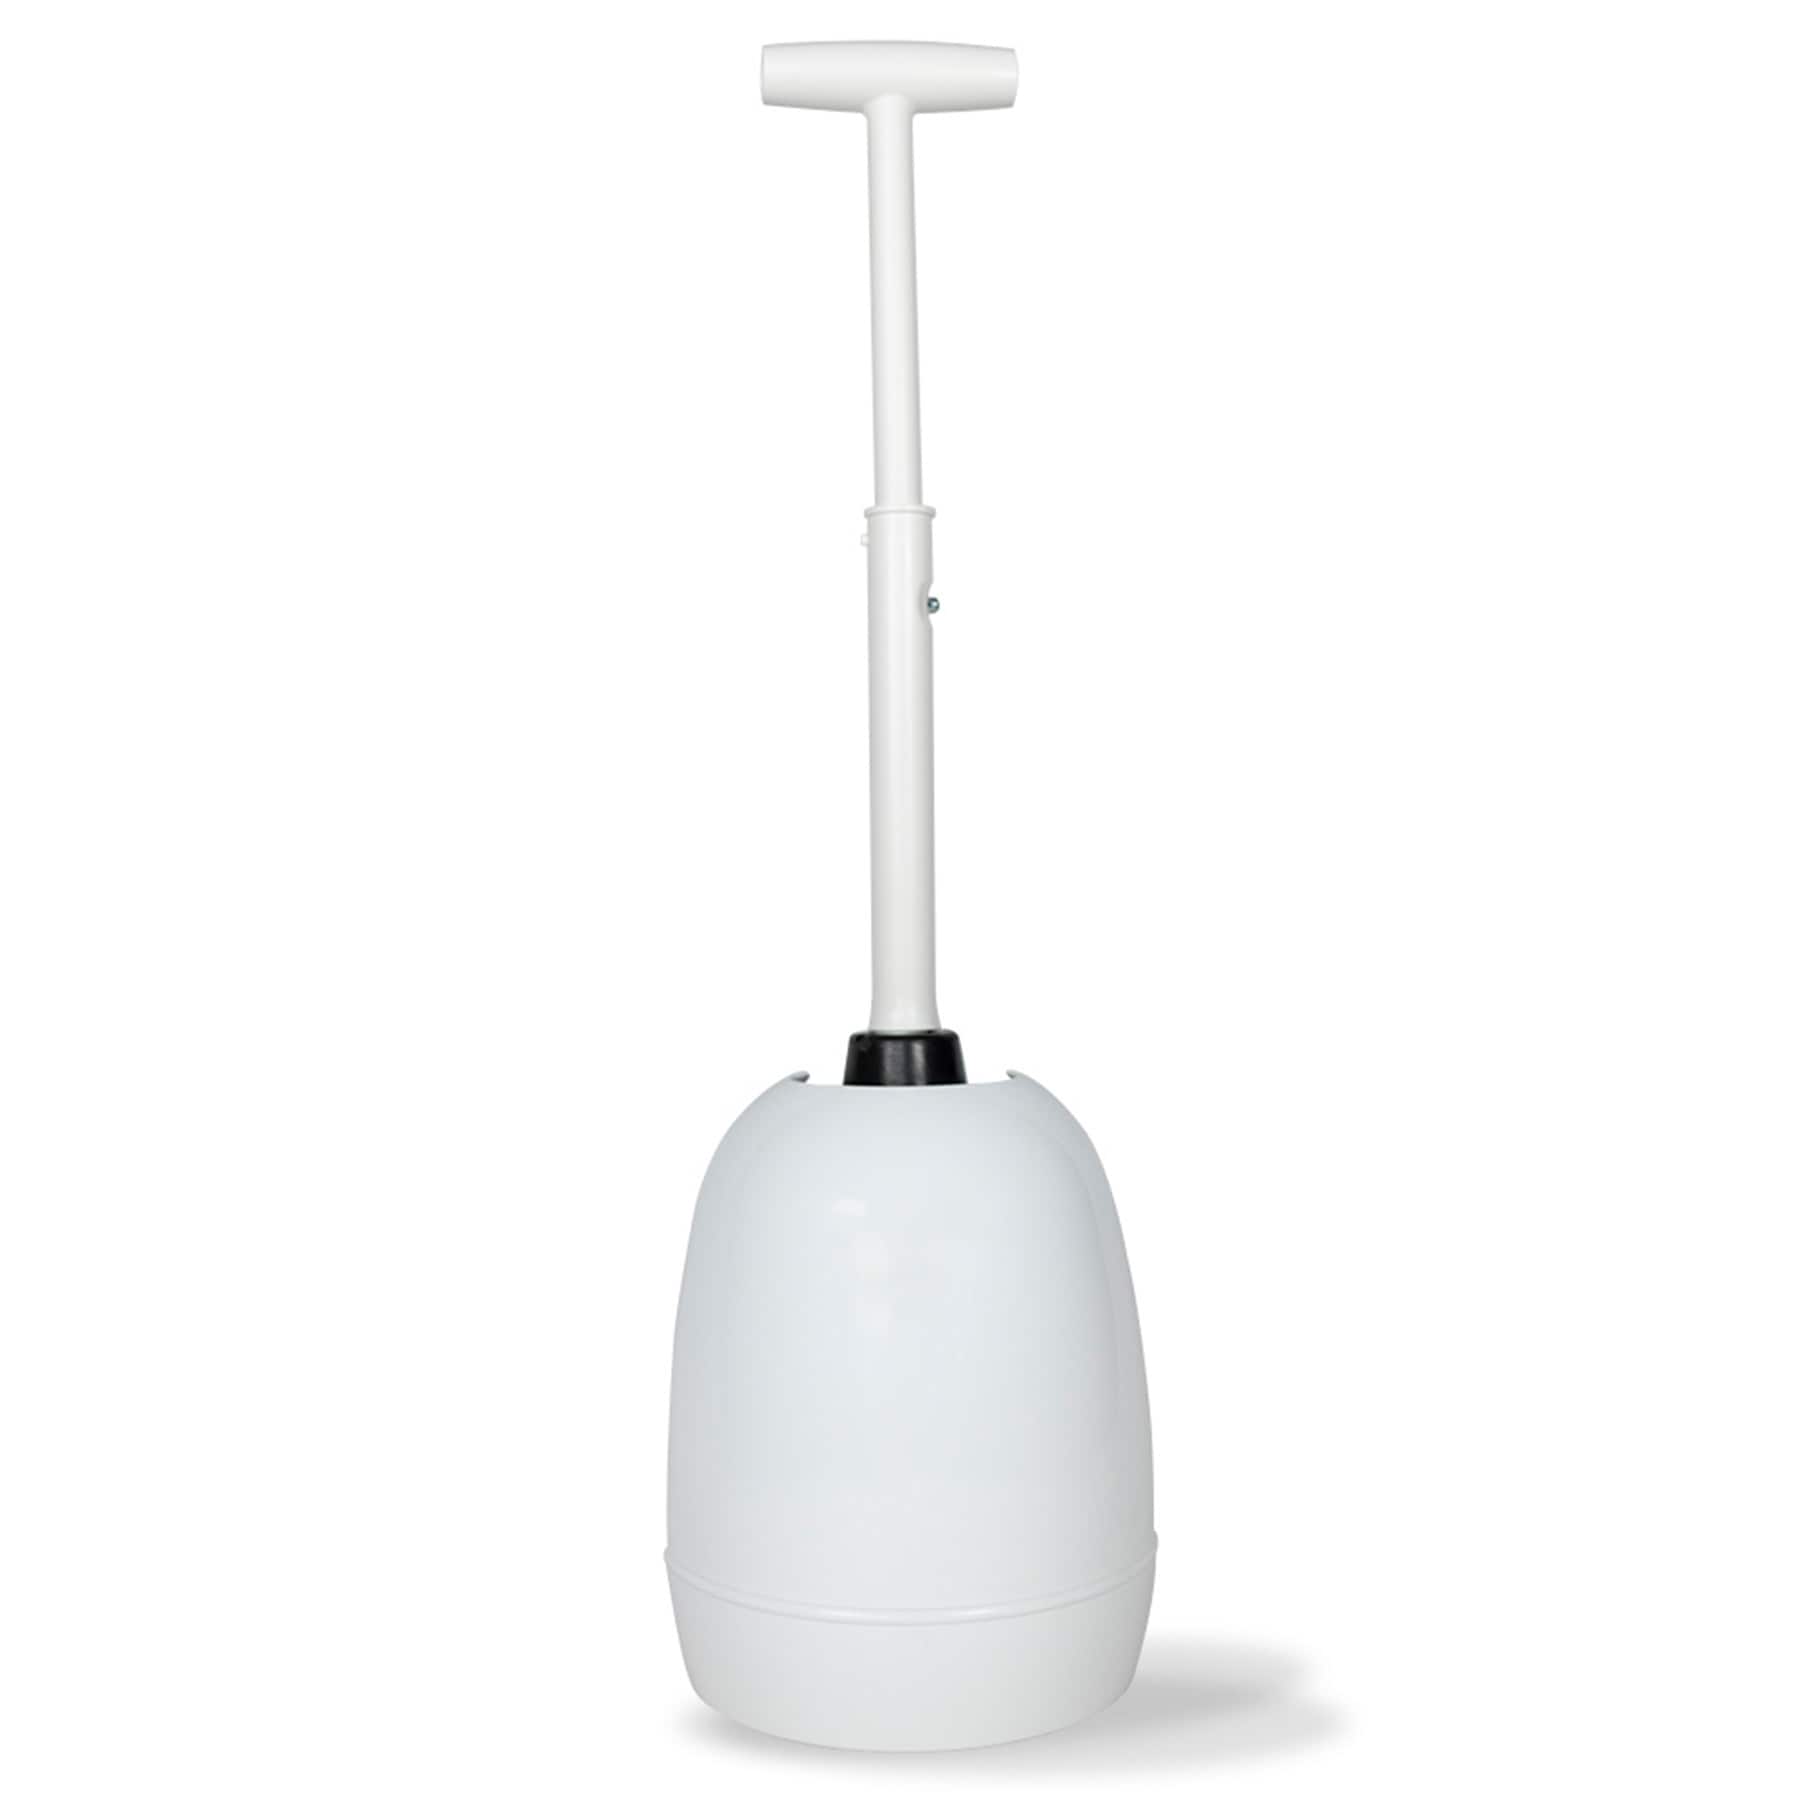 OXO Good Grips Hideaway Toilet Plunger and Canister 